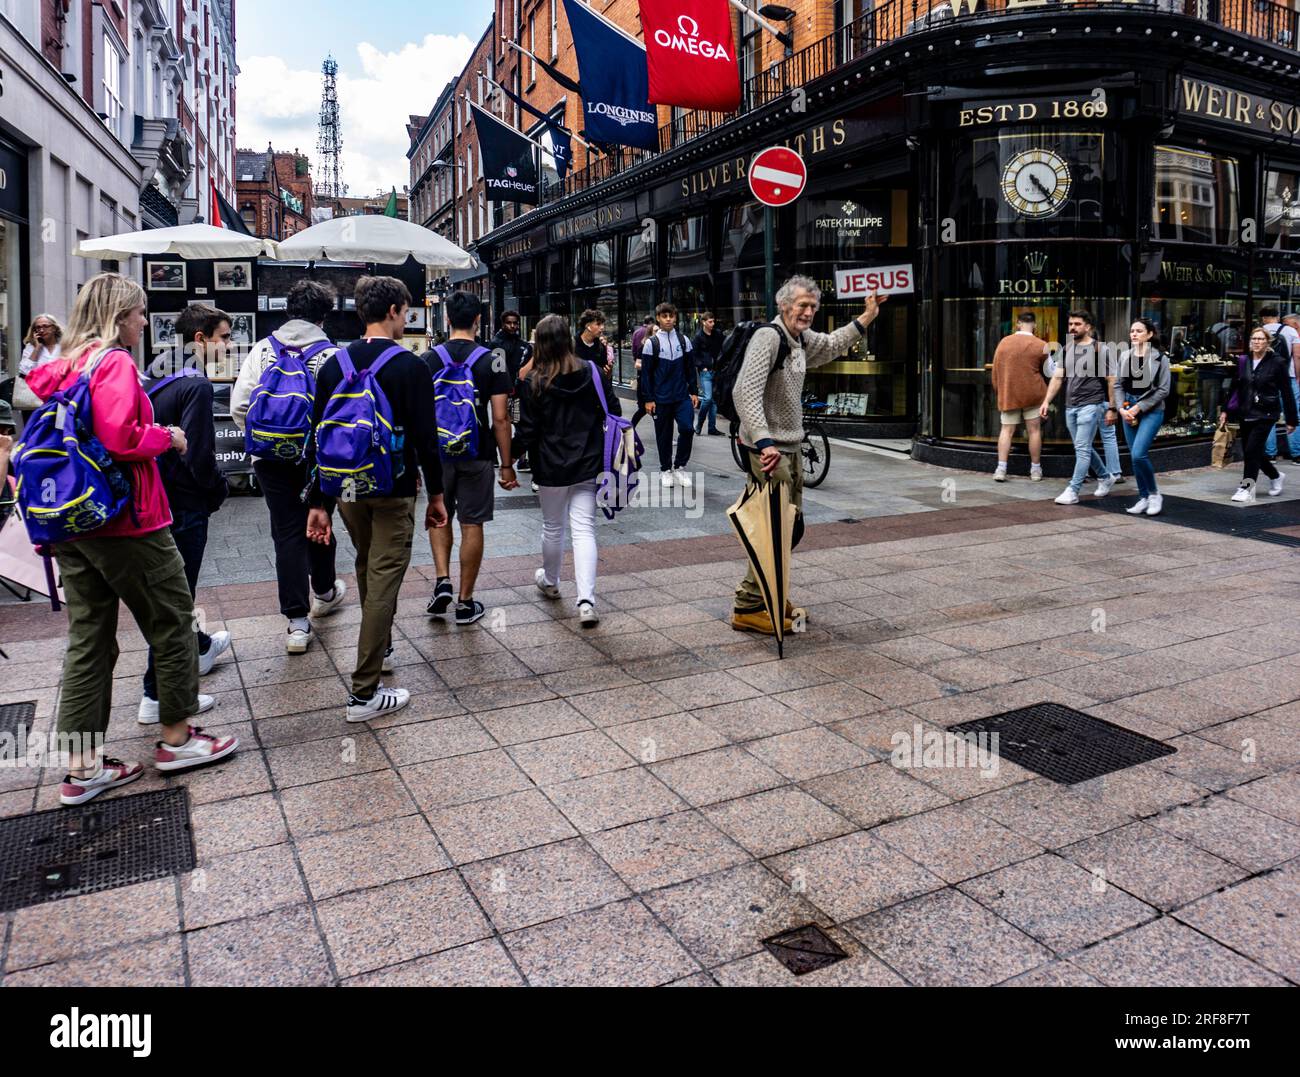 A man holding a sign for JESUS in Grafton Street, Dublin, Ireland. Stock Photo